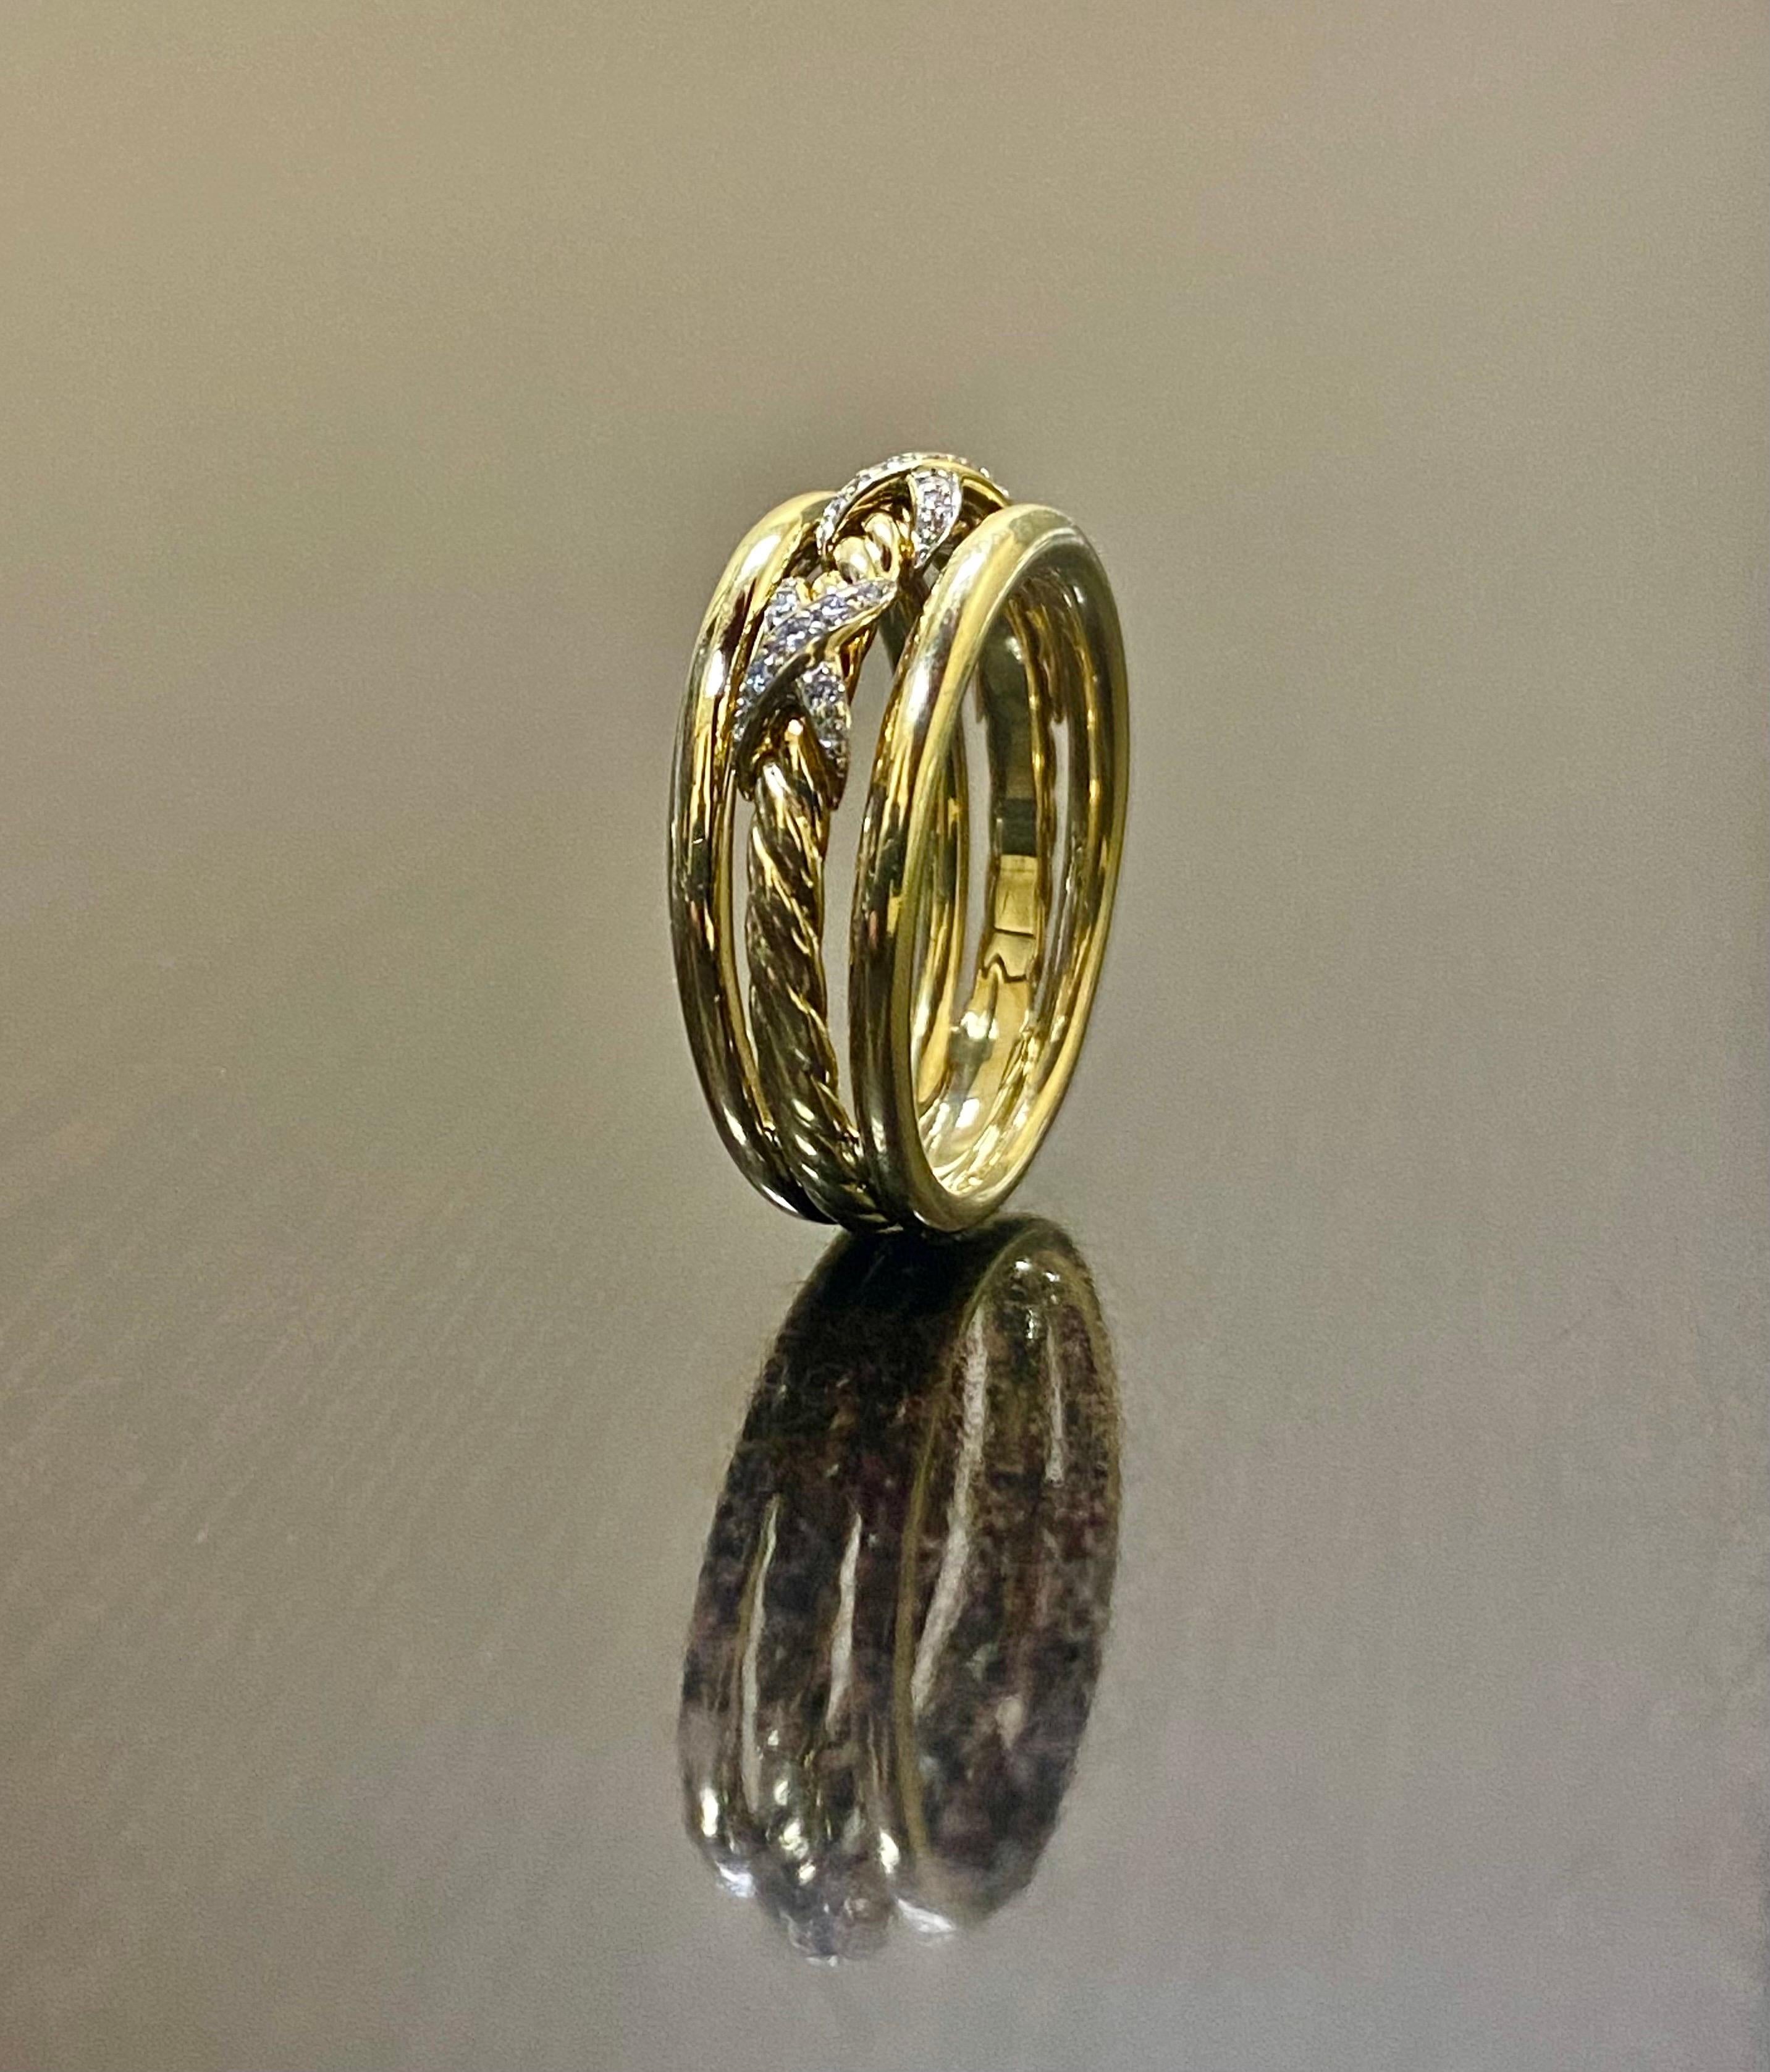 DeKara Design Designer Collection

Metal- 18K Yellow Gold, .750.

Stones- 31 Round Diamonds F-G Color VS2 Clarity 0.21 Carats.

Authentic David Yurman 18K Yellow Gold Diamond Three X Diamond Ring From the Crossover Collection. The ring features